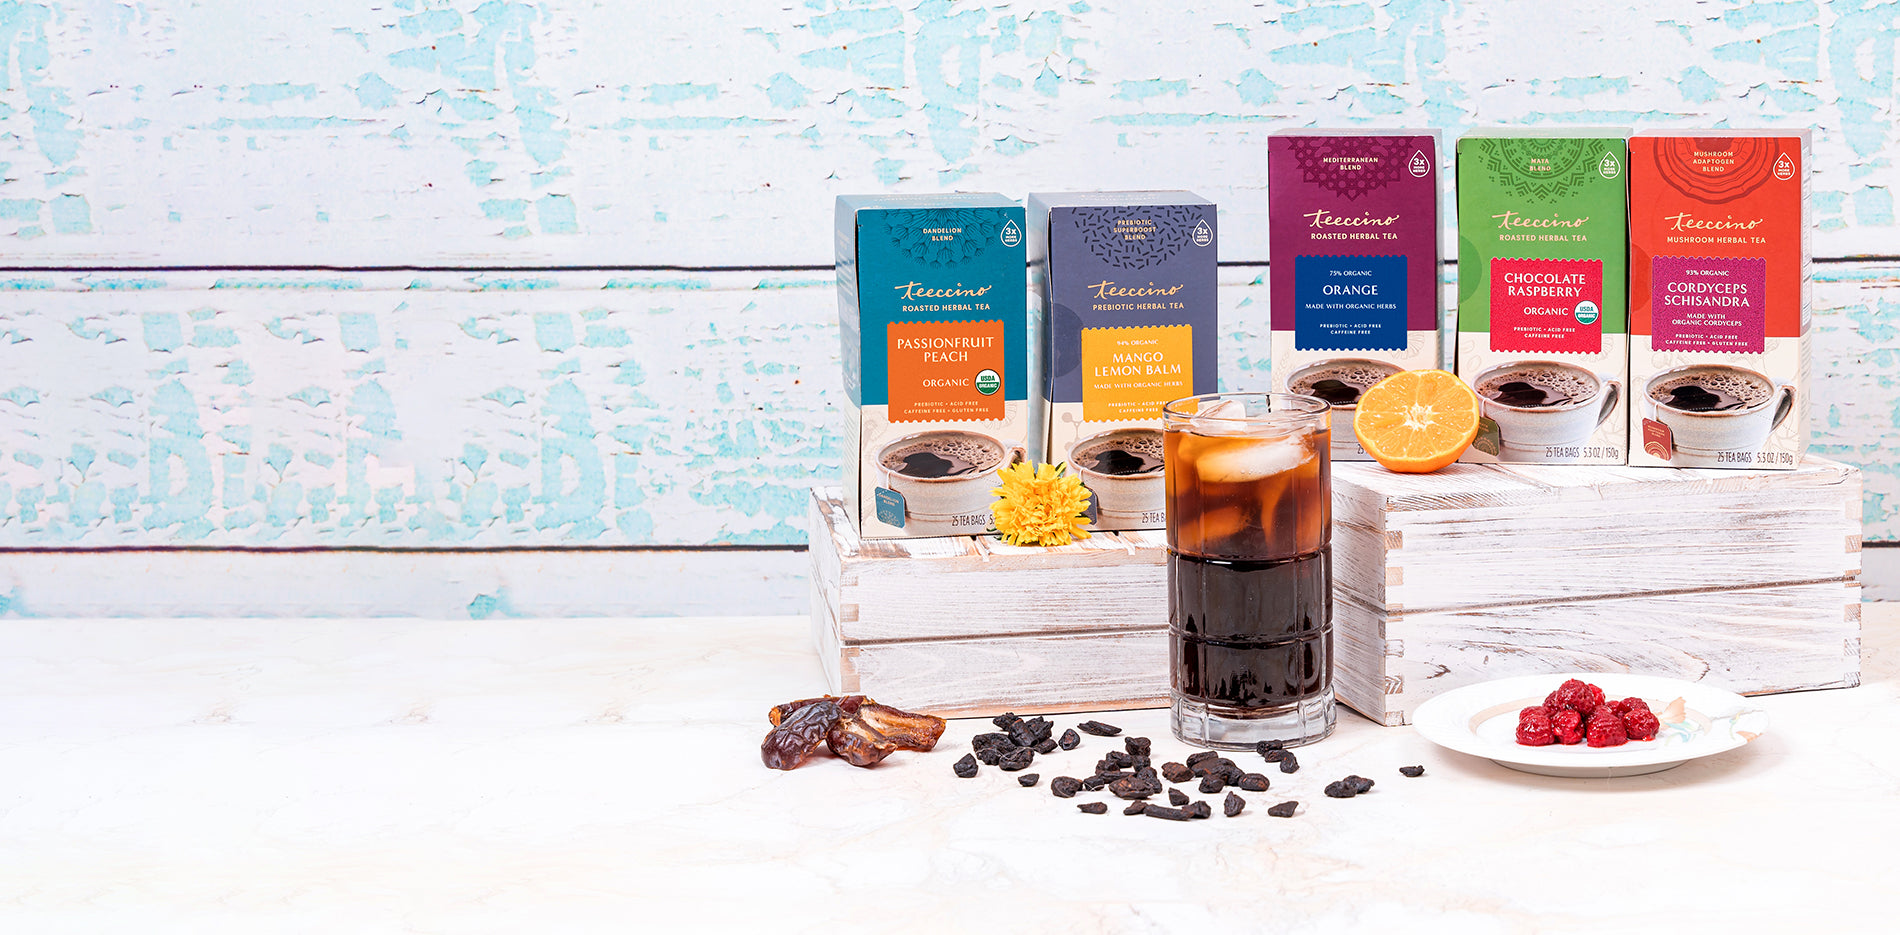 Tall glass with dark iced beverage. Bags and boxes of teeccino flavors, mango lemon balm, Cordyceps, Chocolate raspberry. Ingredients scattered tastefully in front